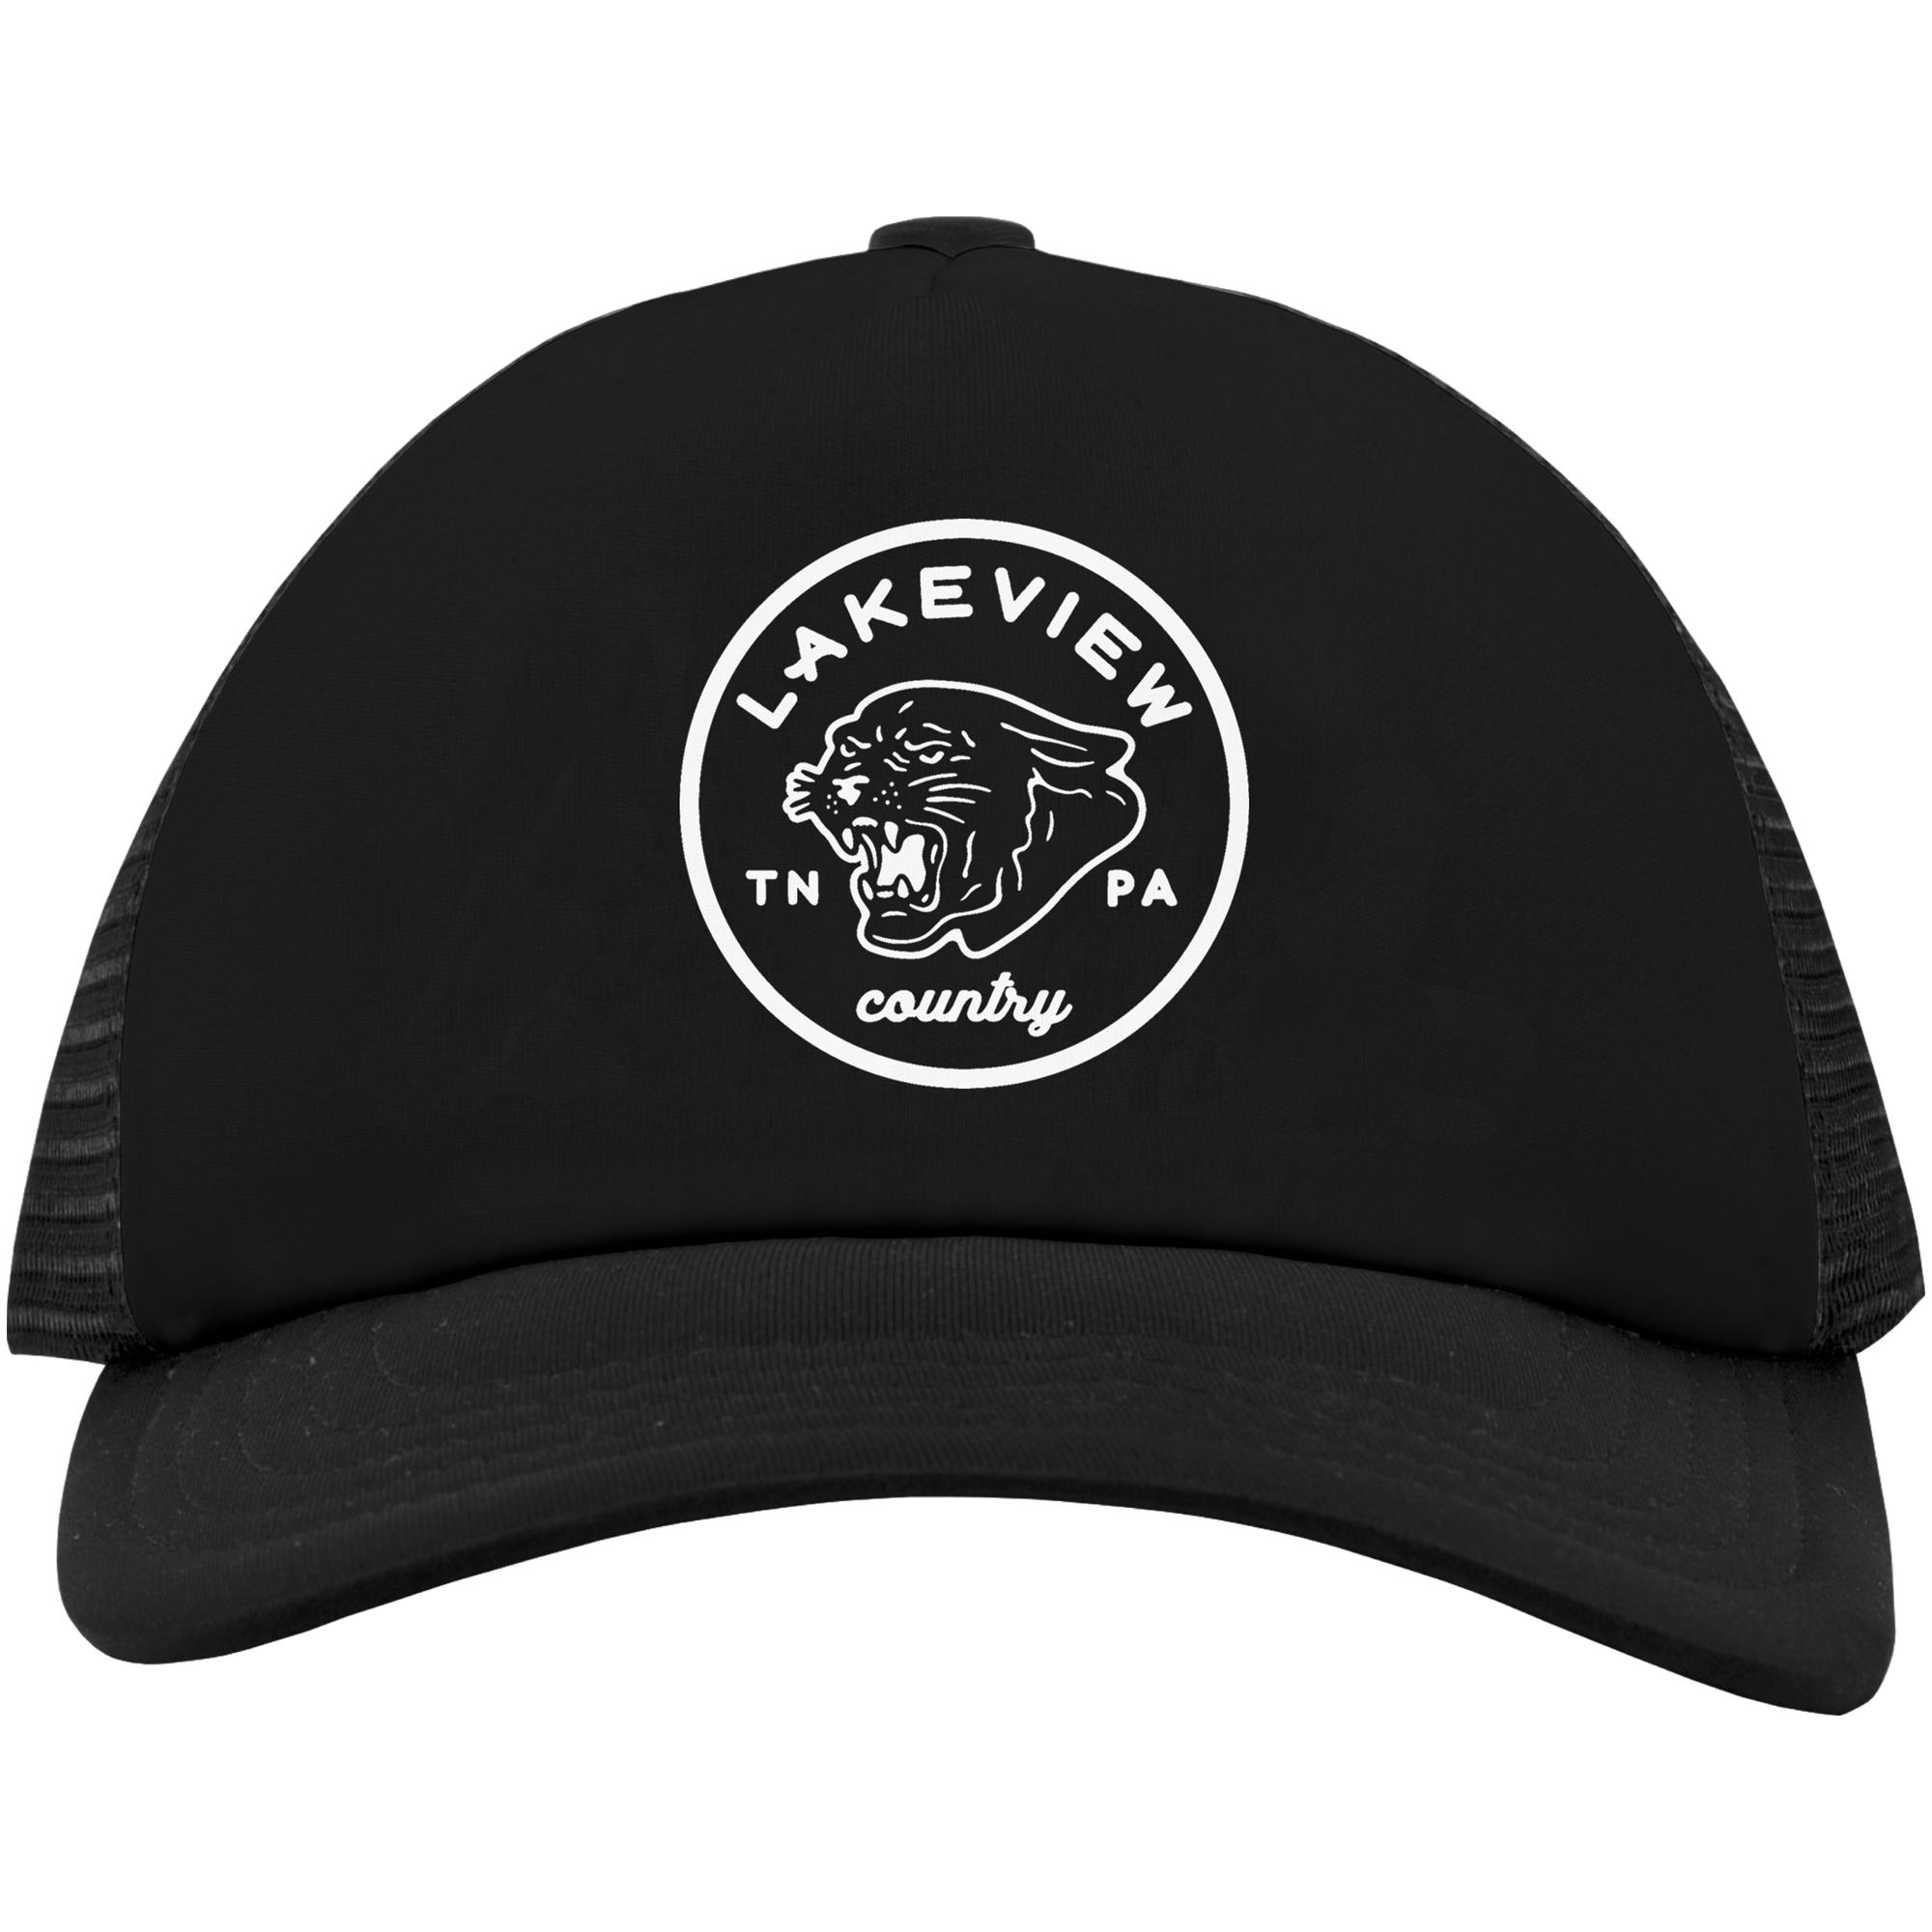 Lakeview - Panther Trucker Hat